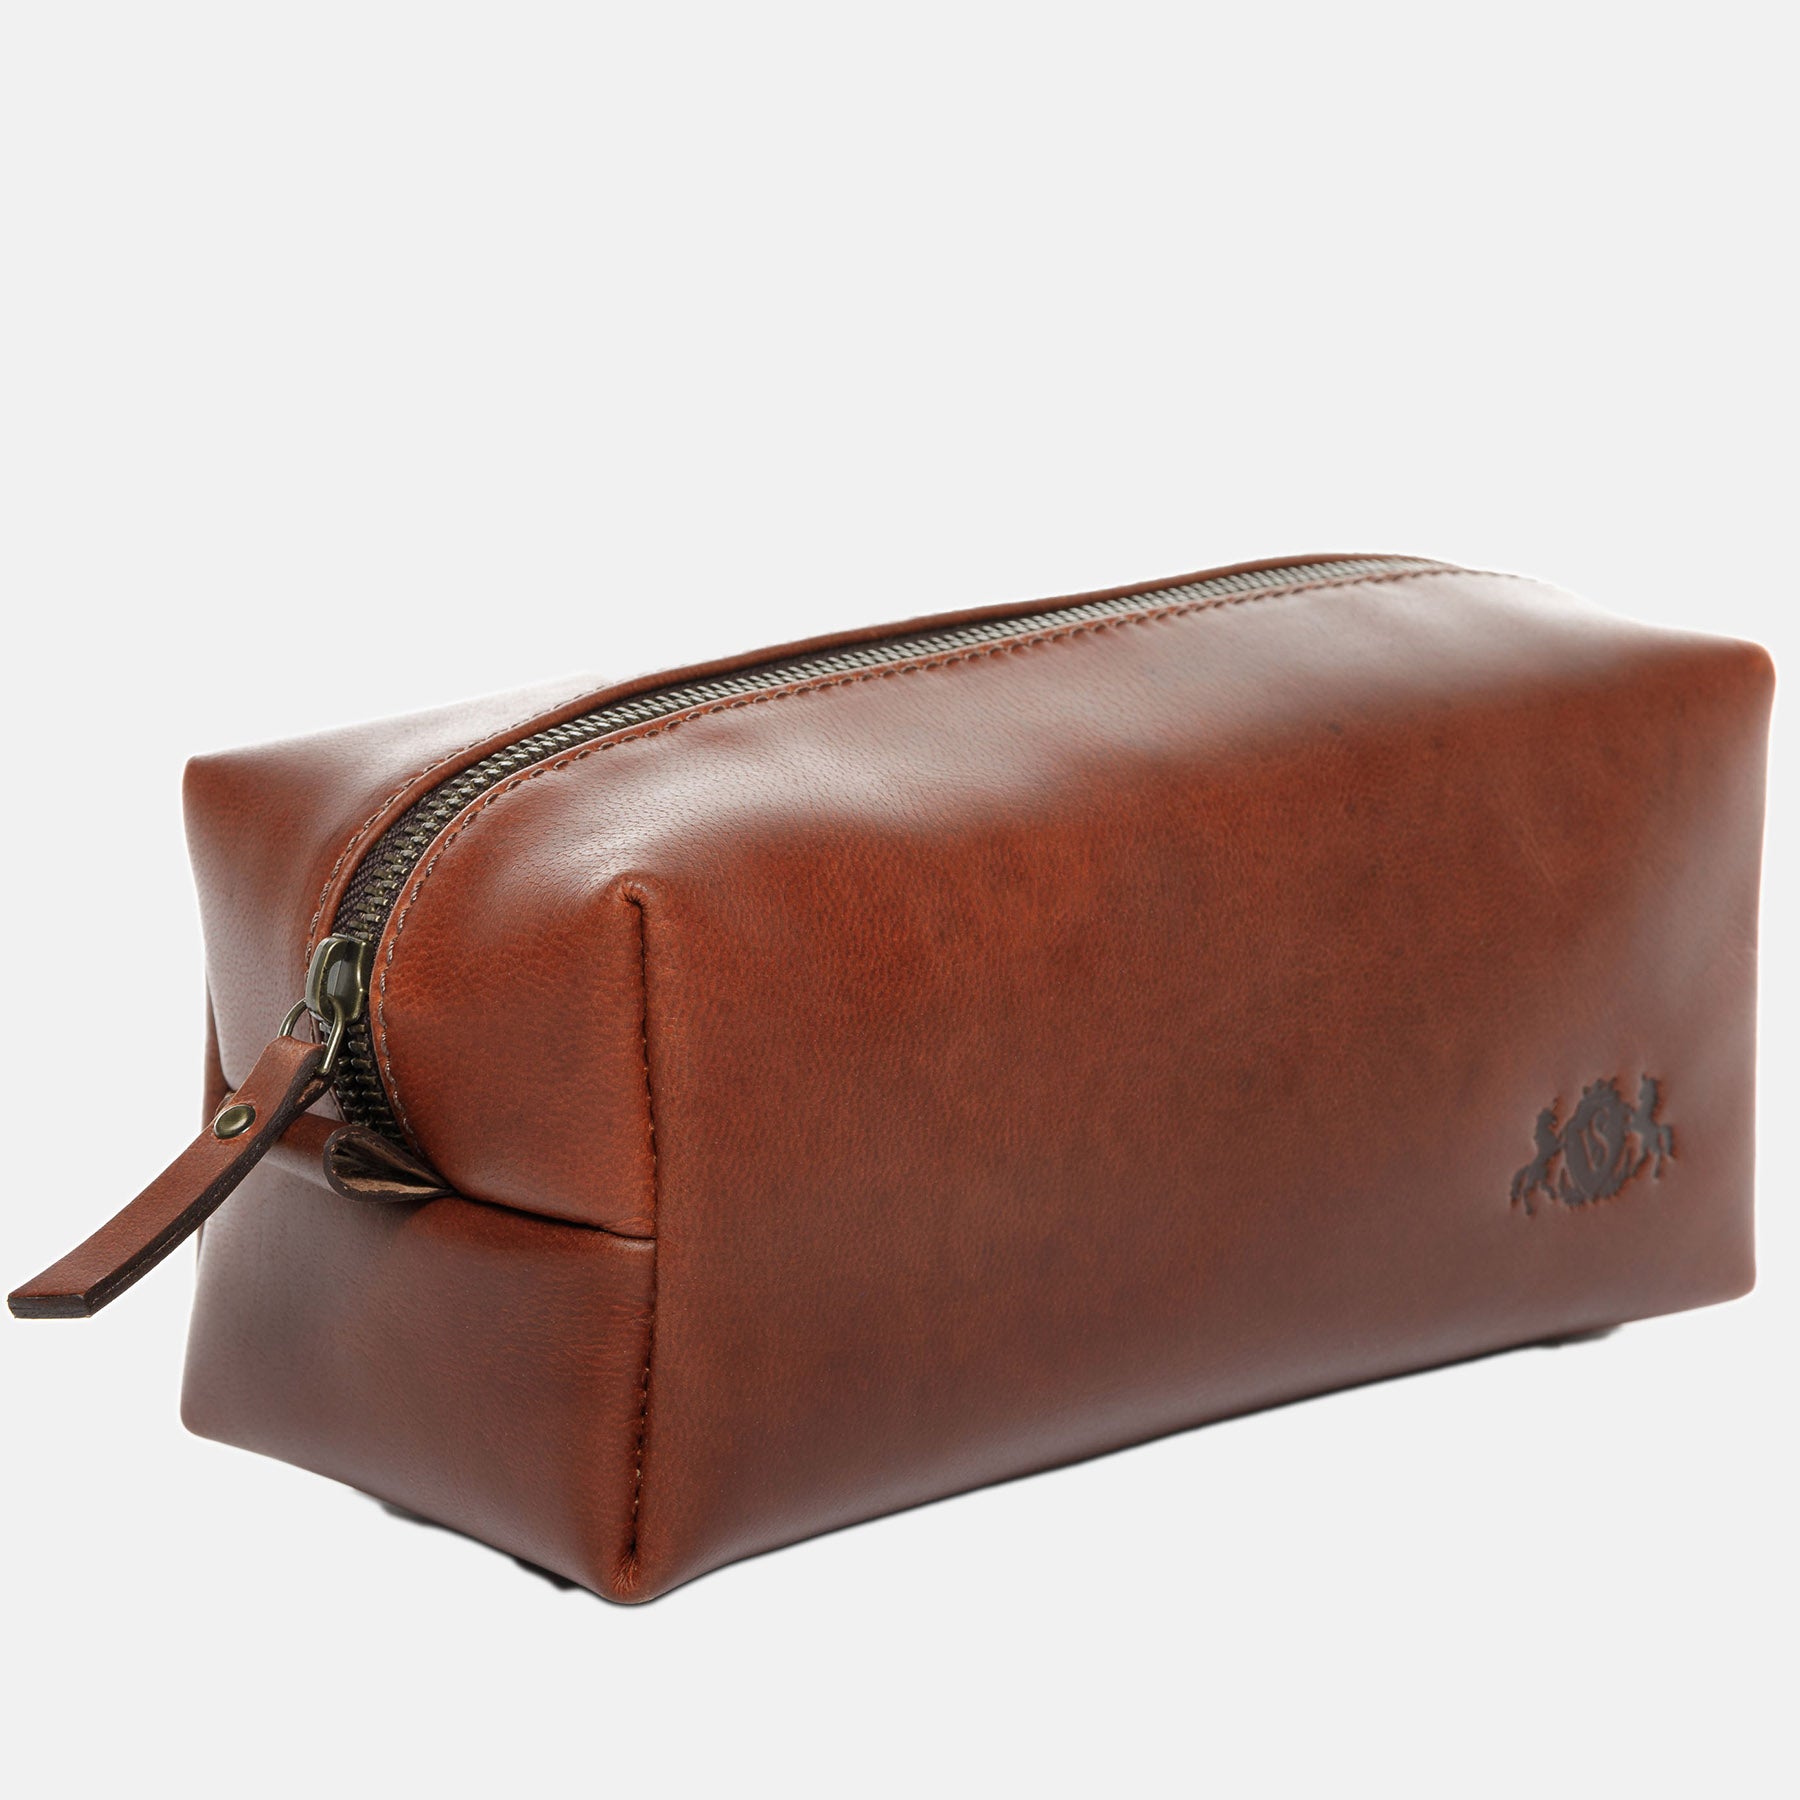 Toilet bag JAY smooth leather light brown